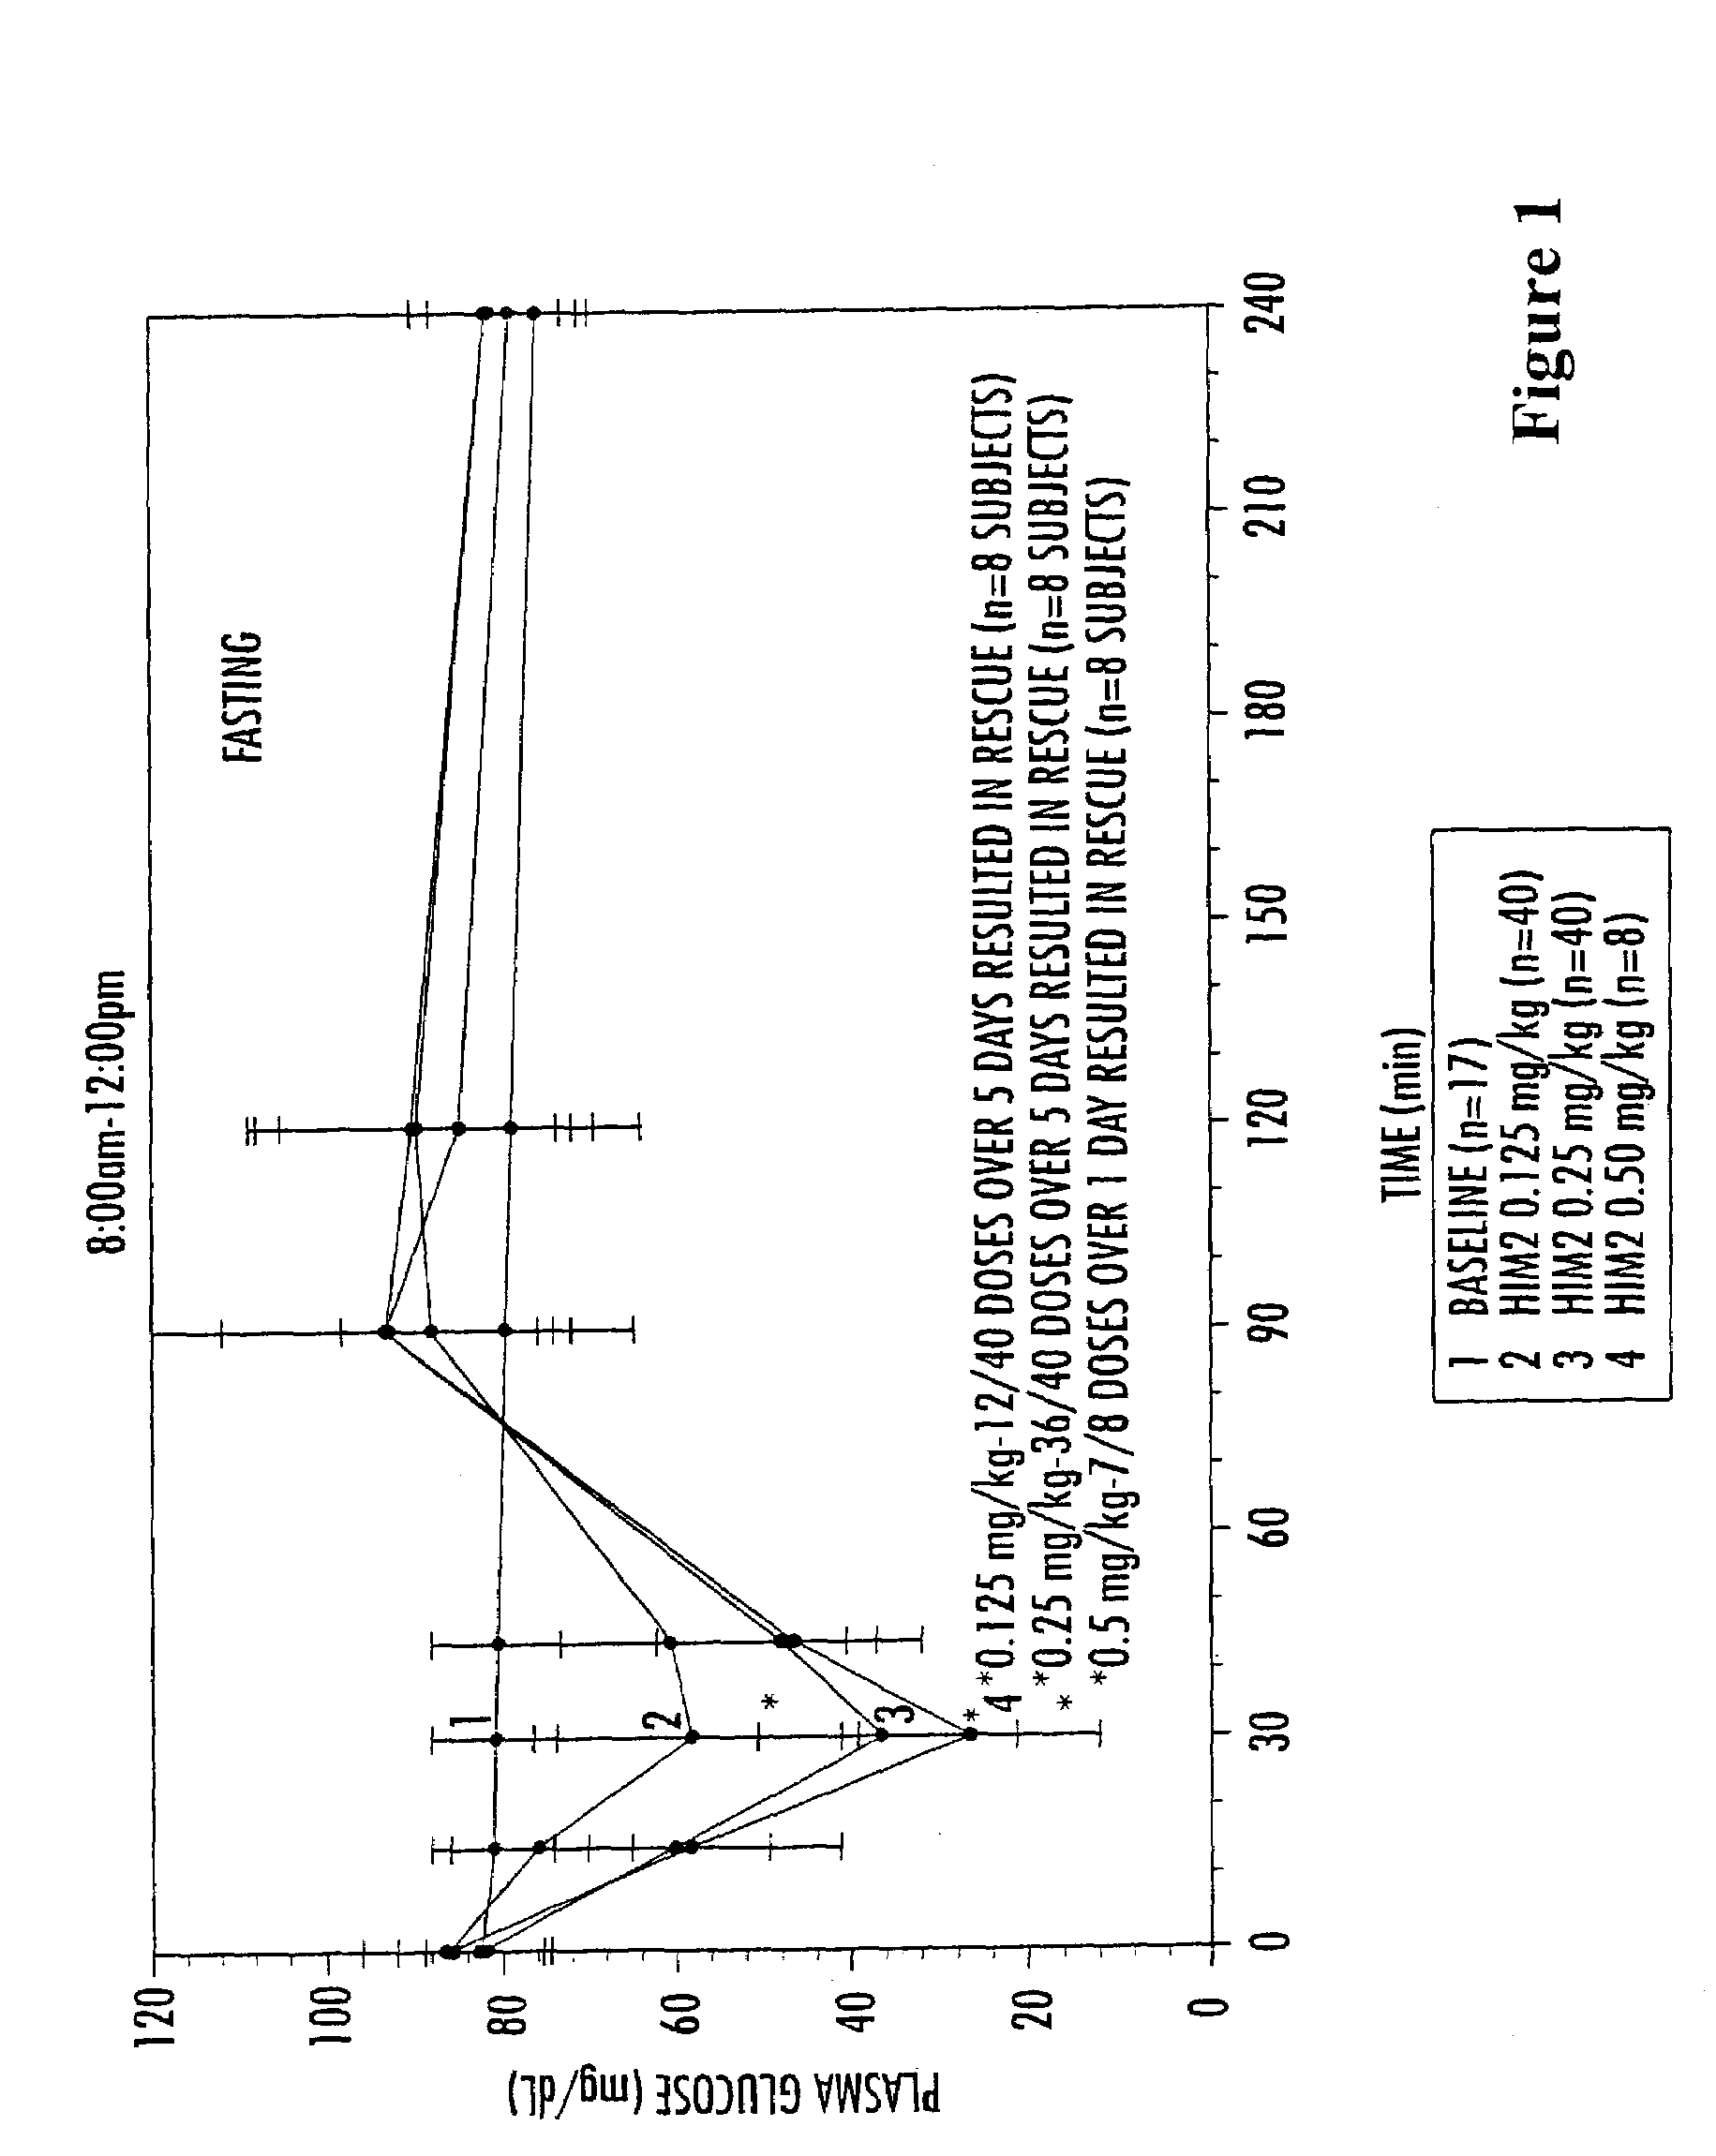 Pharmaceutical compositions of insulin drug-oligomer conjugates and methods of treating diseases therewith